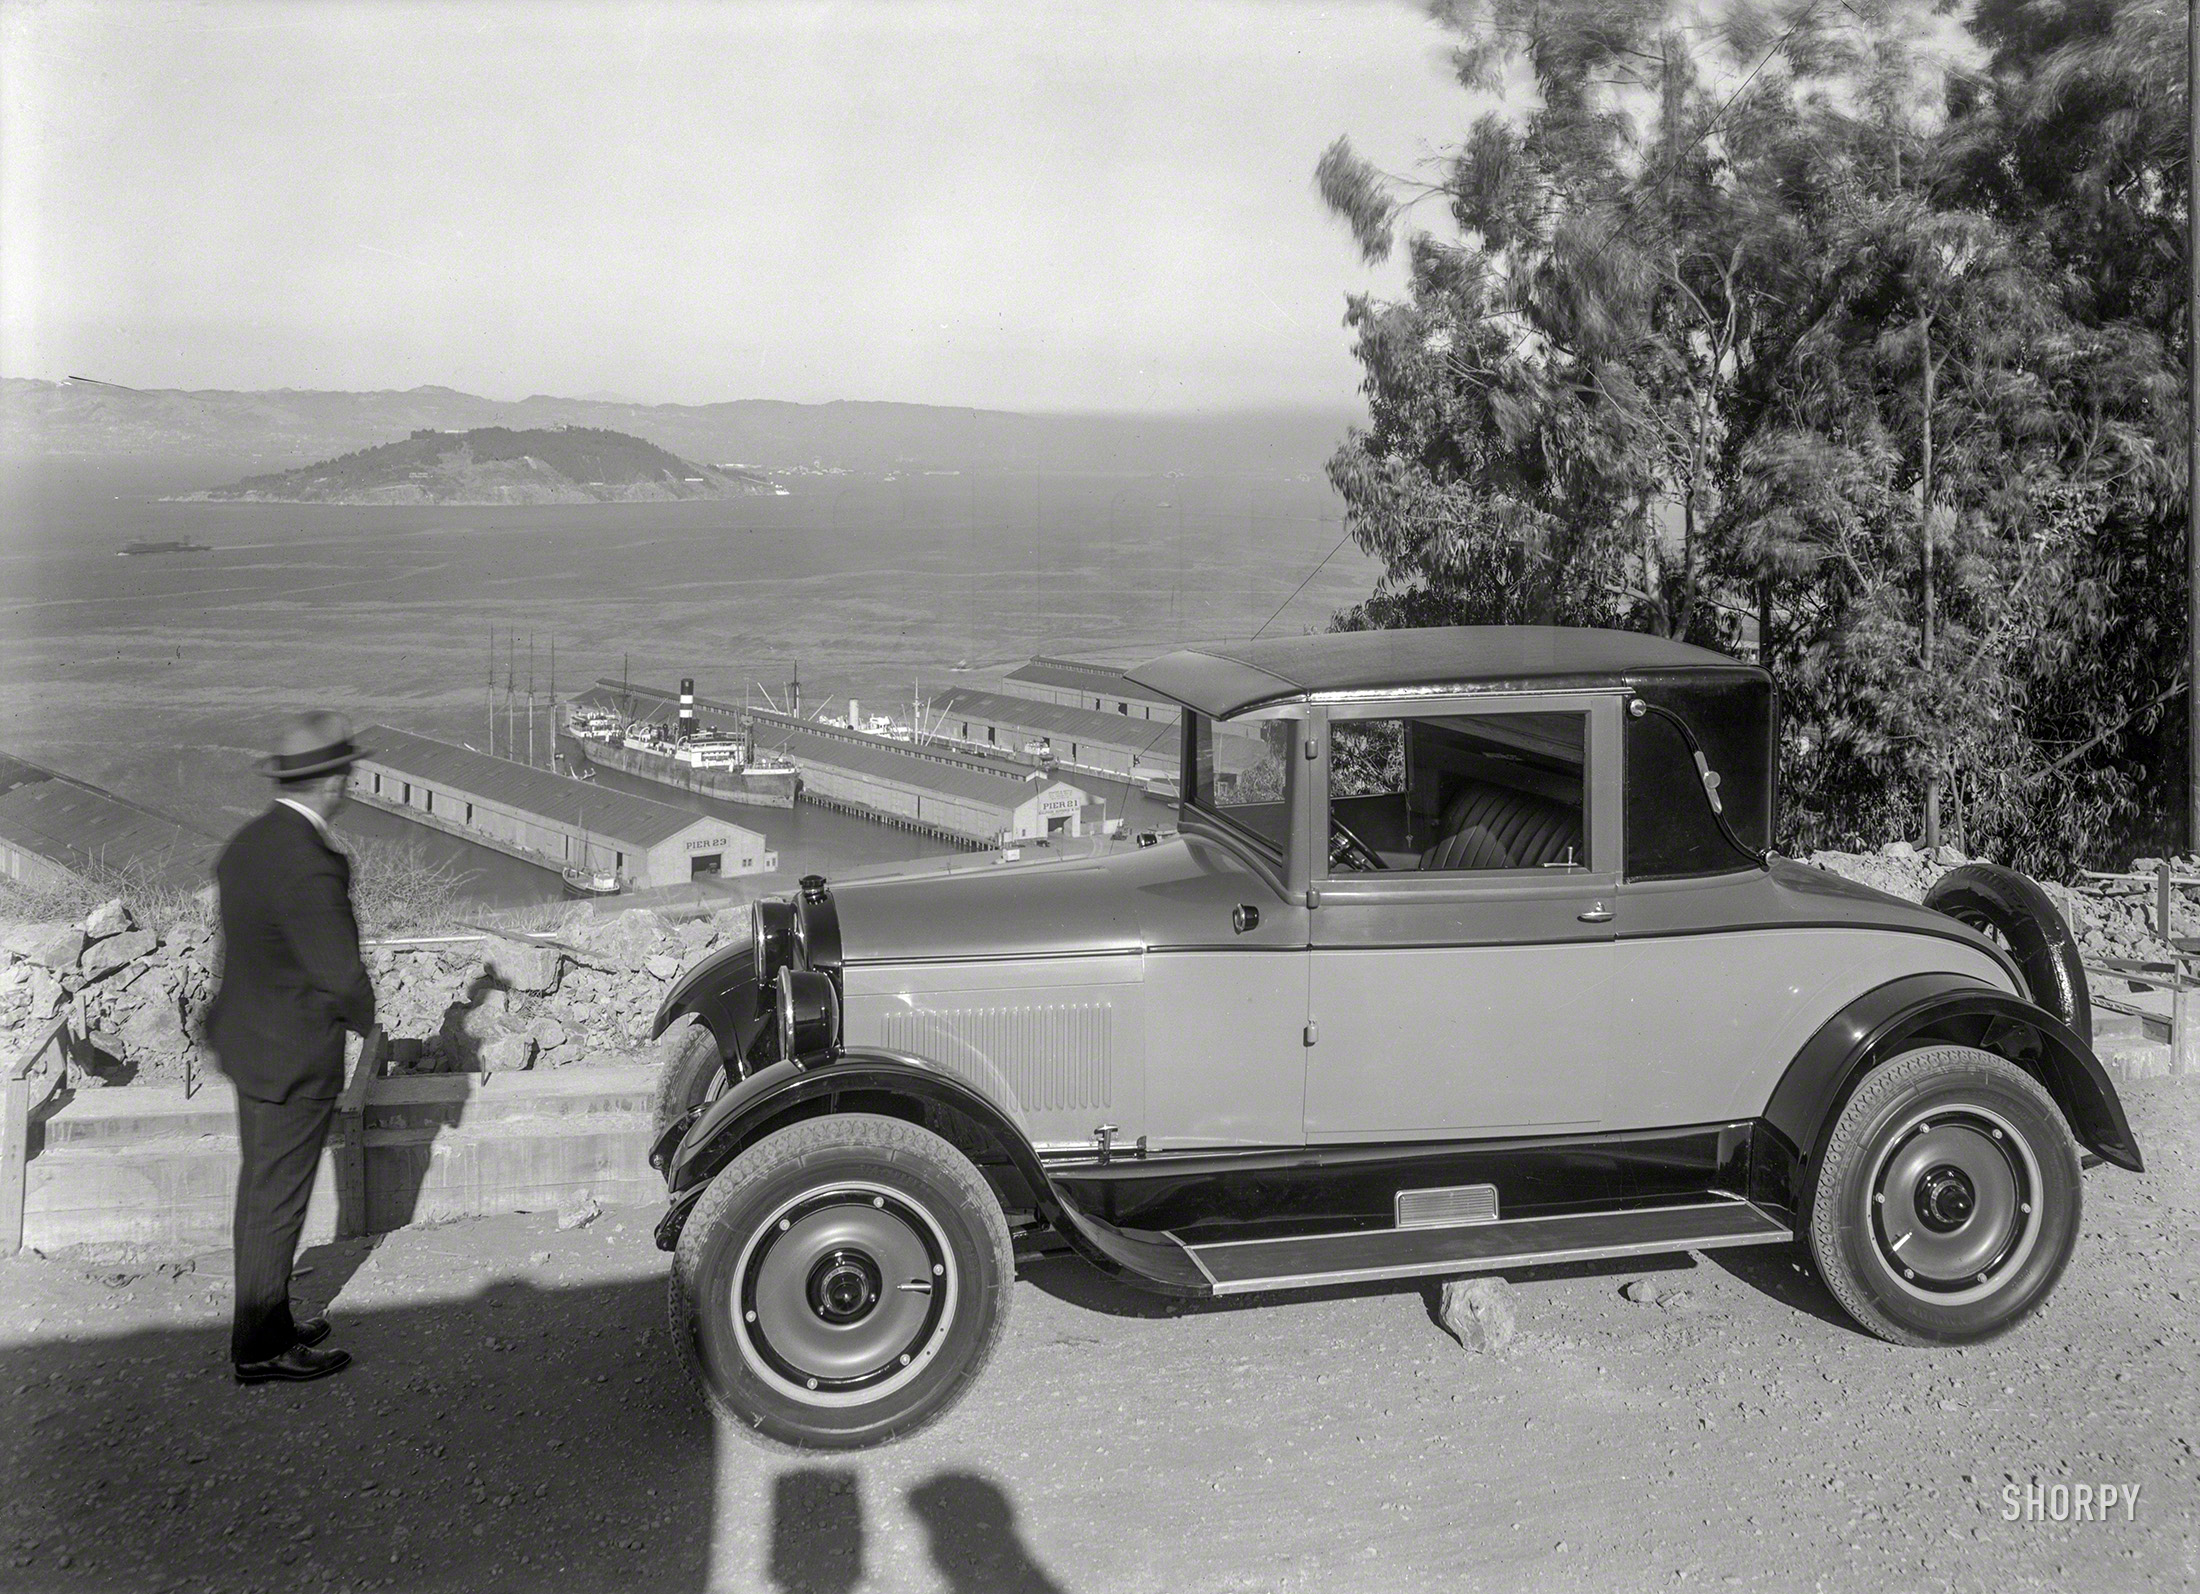 1925. "REO coupe overlooking San Francisco Bay, Embarcadero piers and Yerba Buena Island." Plus an unintentional shadow-selfie. 5x7 glass negative, formerly of the Wyland Stanley and Marilyn Blaisdell collections. View full size.